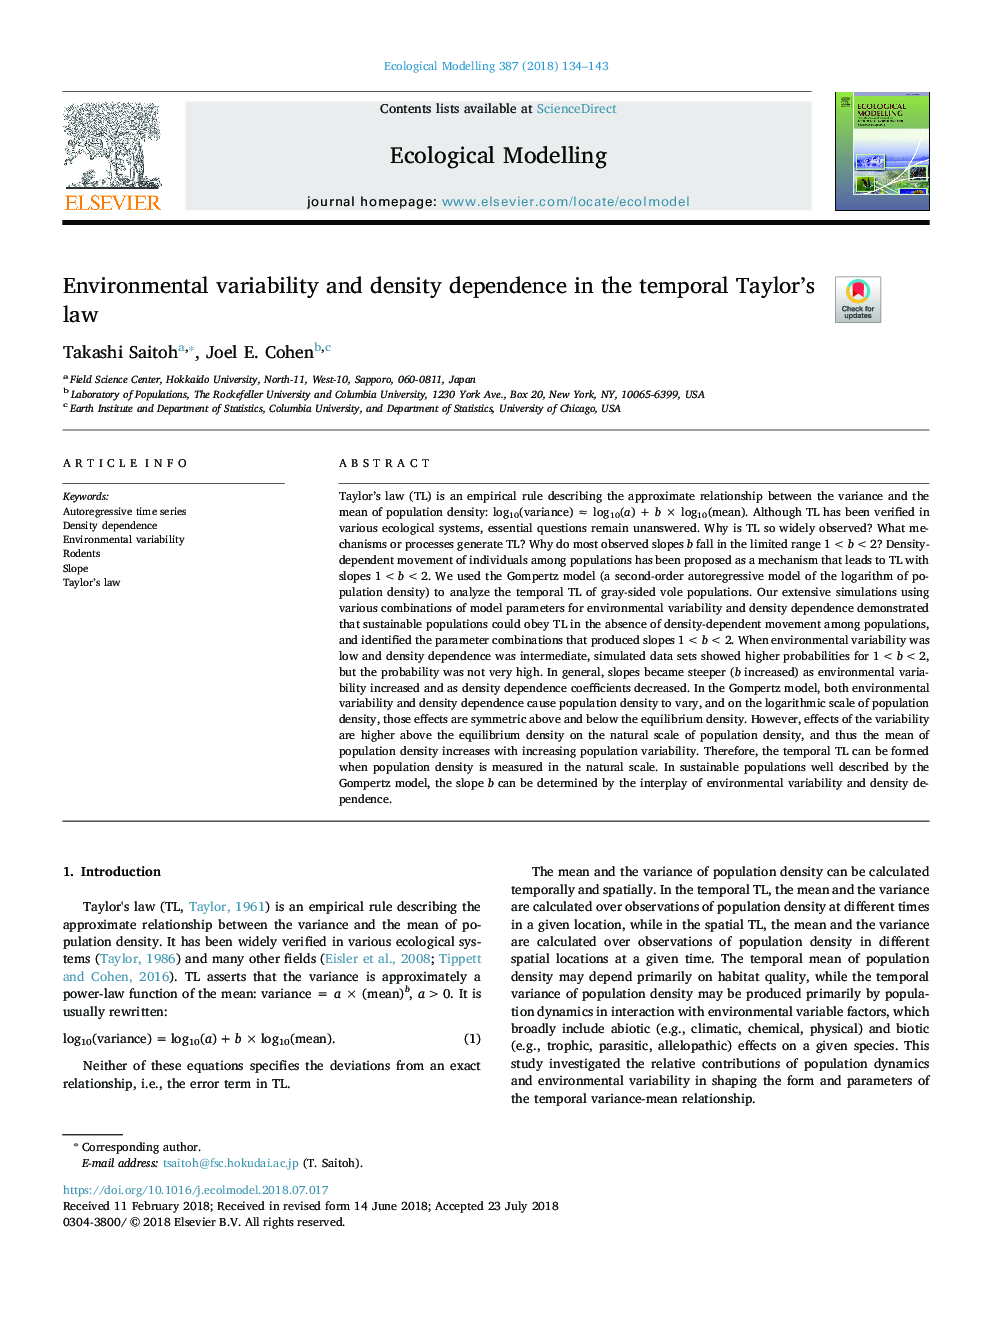 Environmental variability and density dependence in the temporal Taylor's law